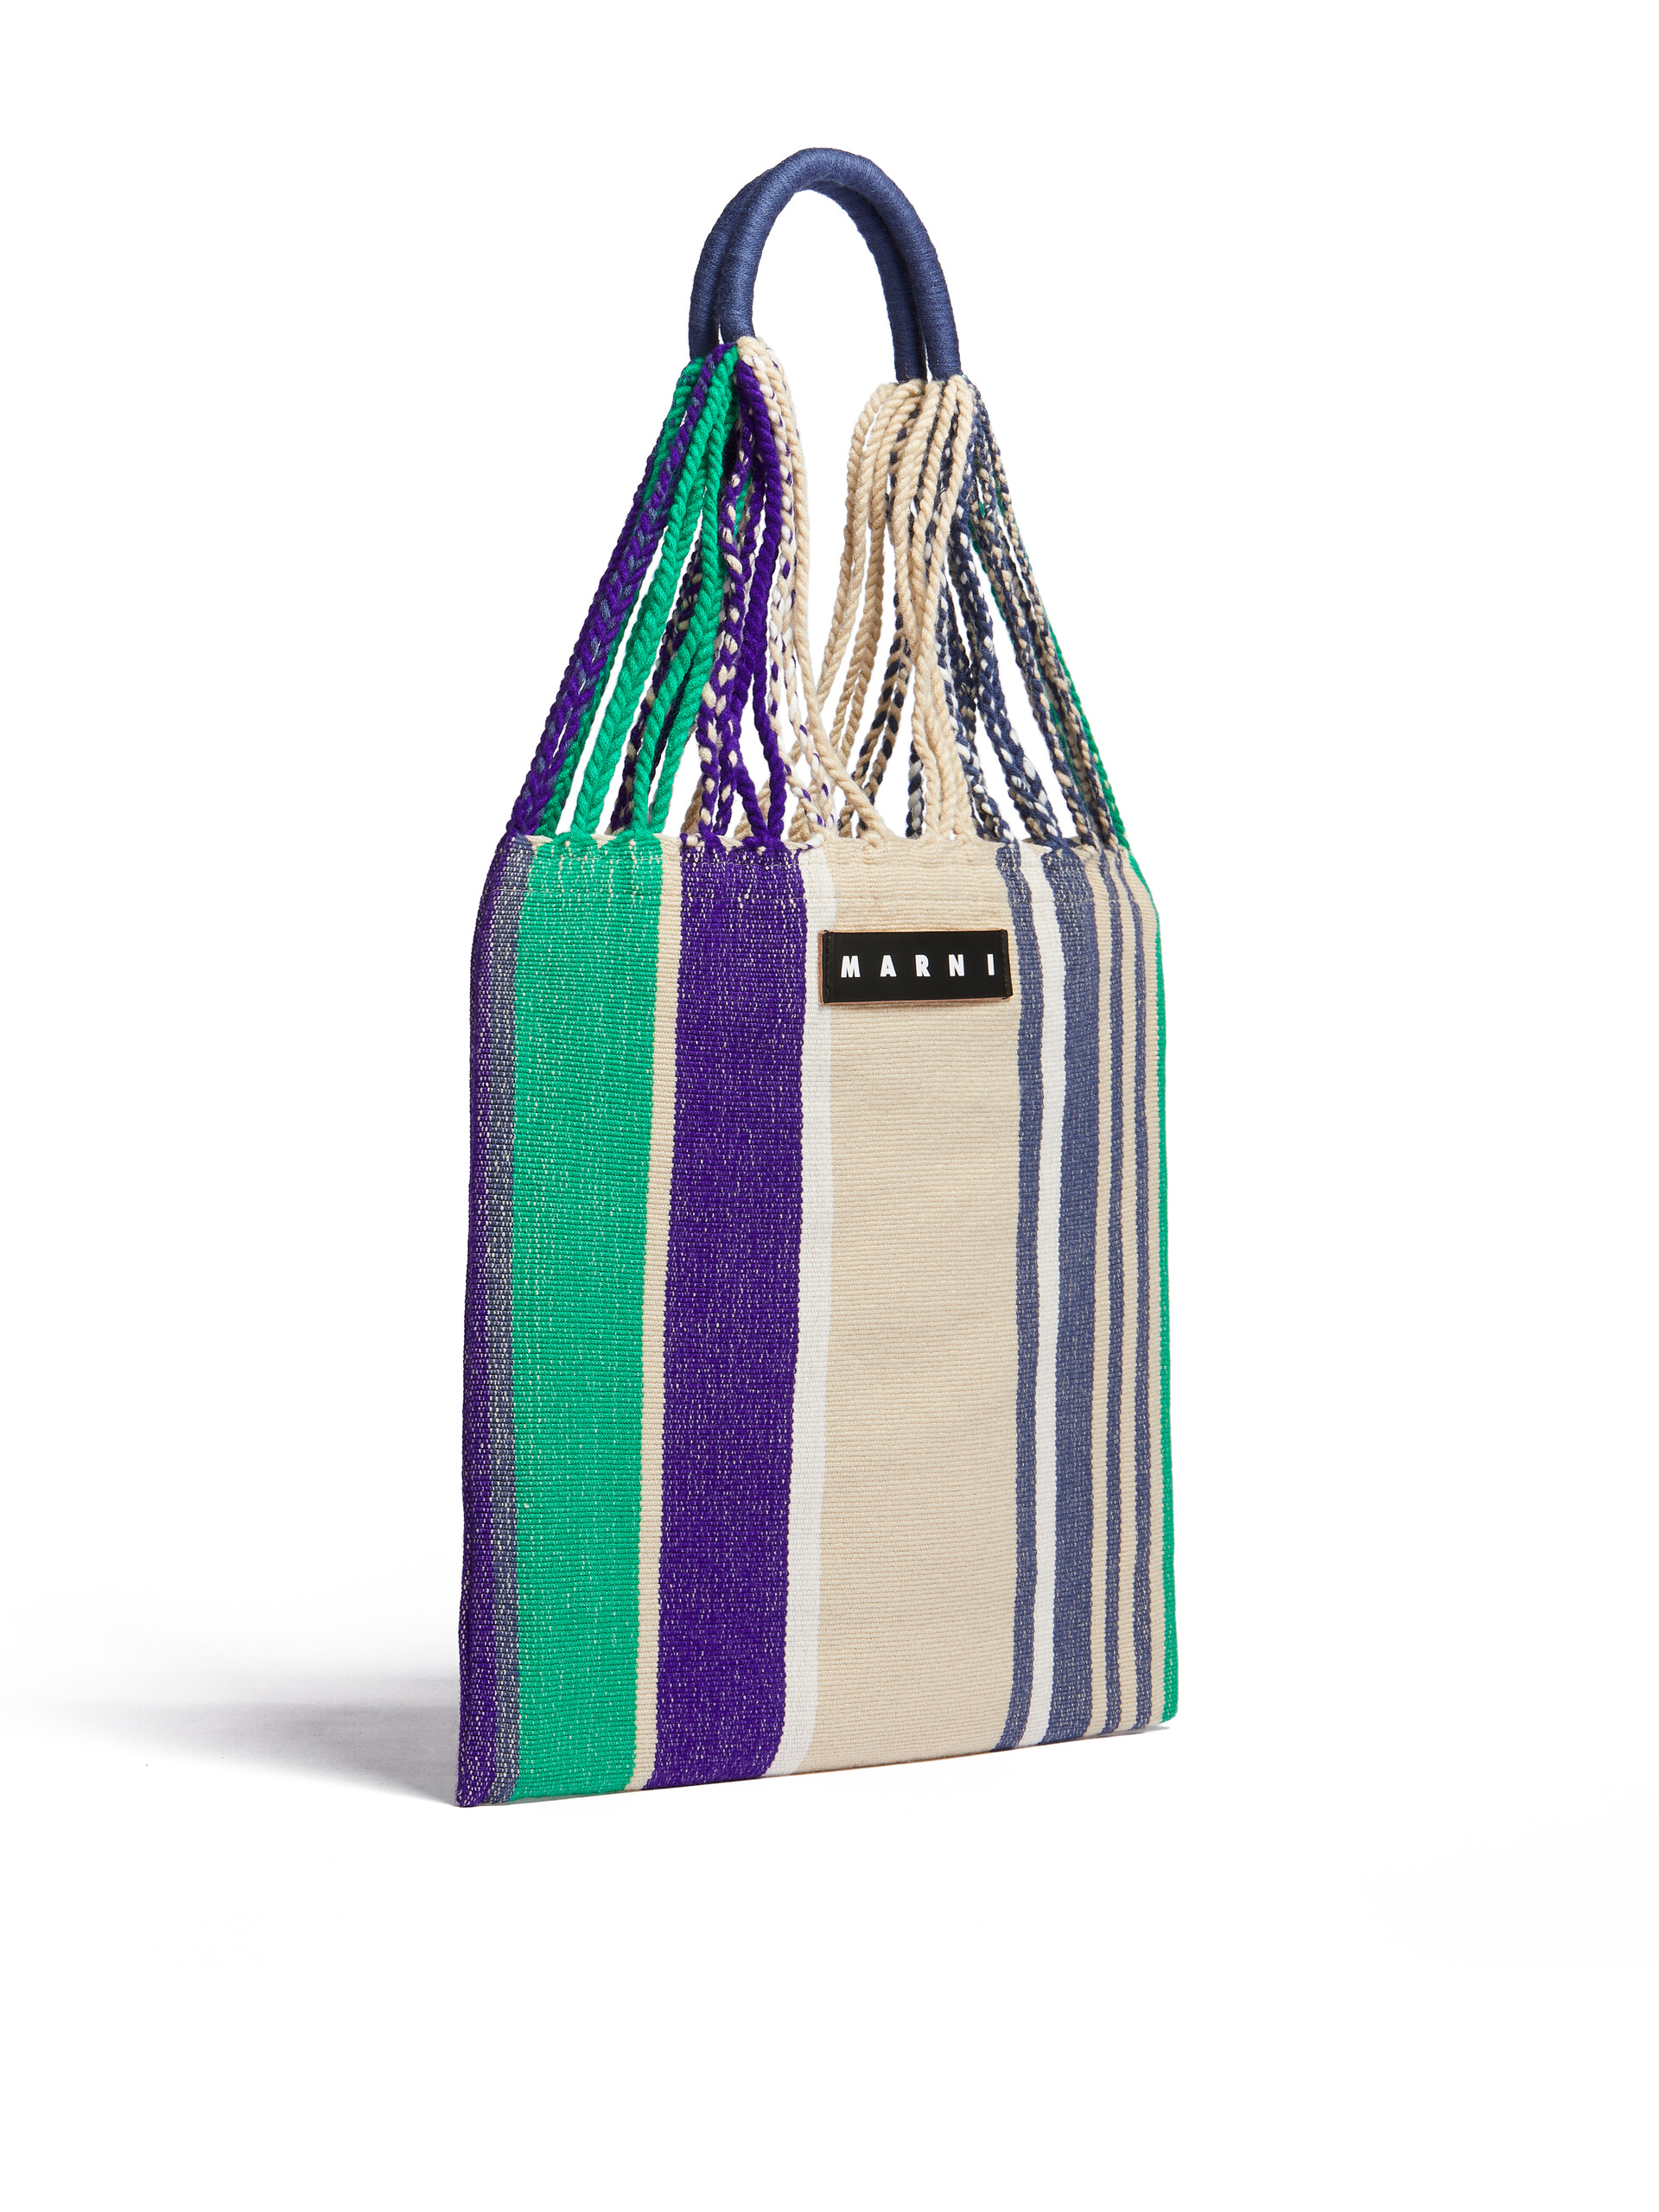 MARNI MARKET shopping bag in polyester with hammock-like handle grey turquoise and red - Bags - Image 2